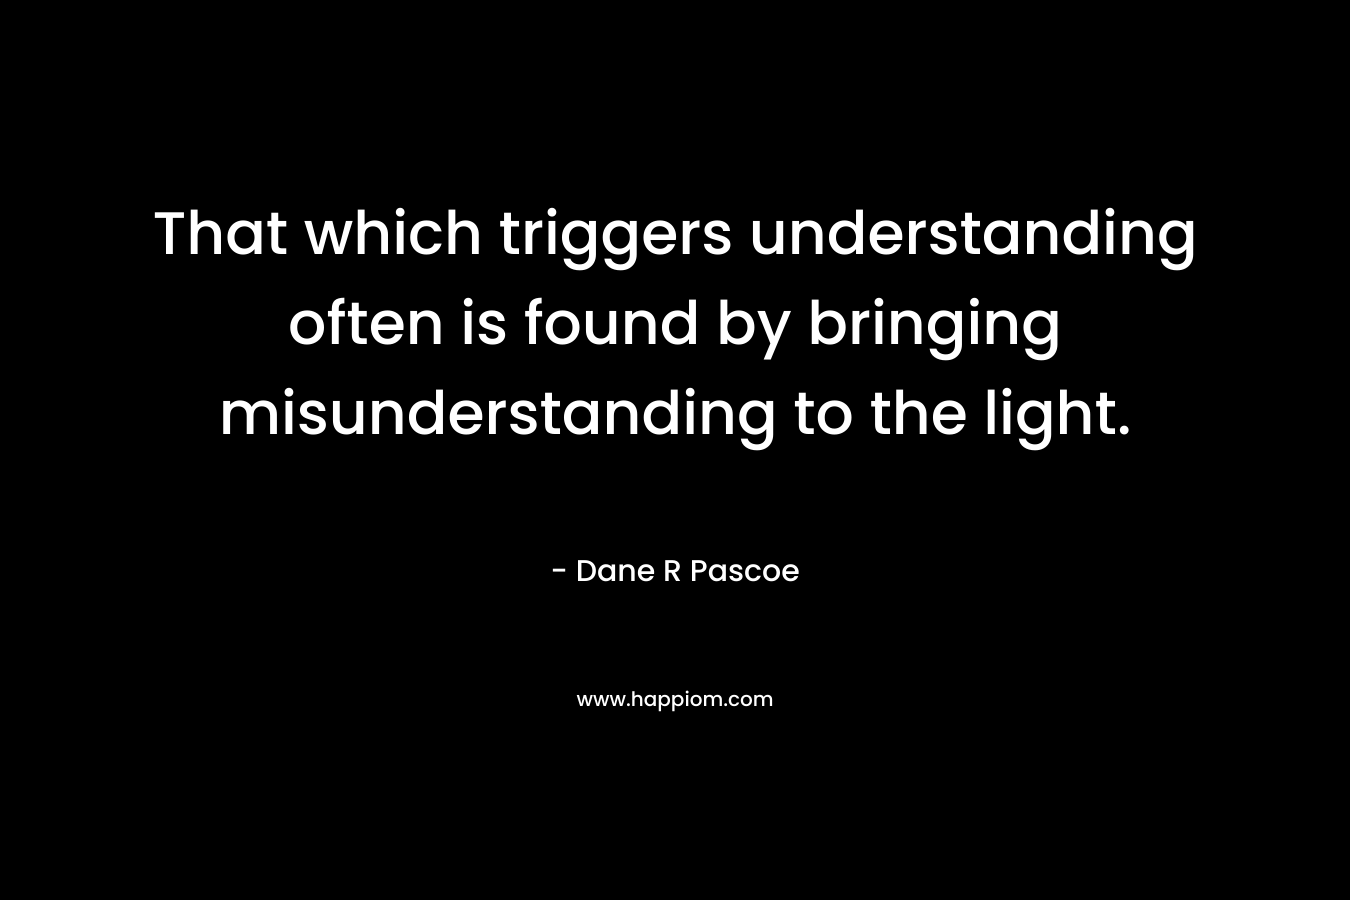 That which triggers understanding often is found by bringing misunderstanding to the light.